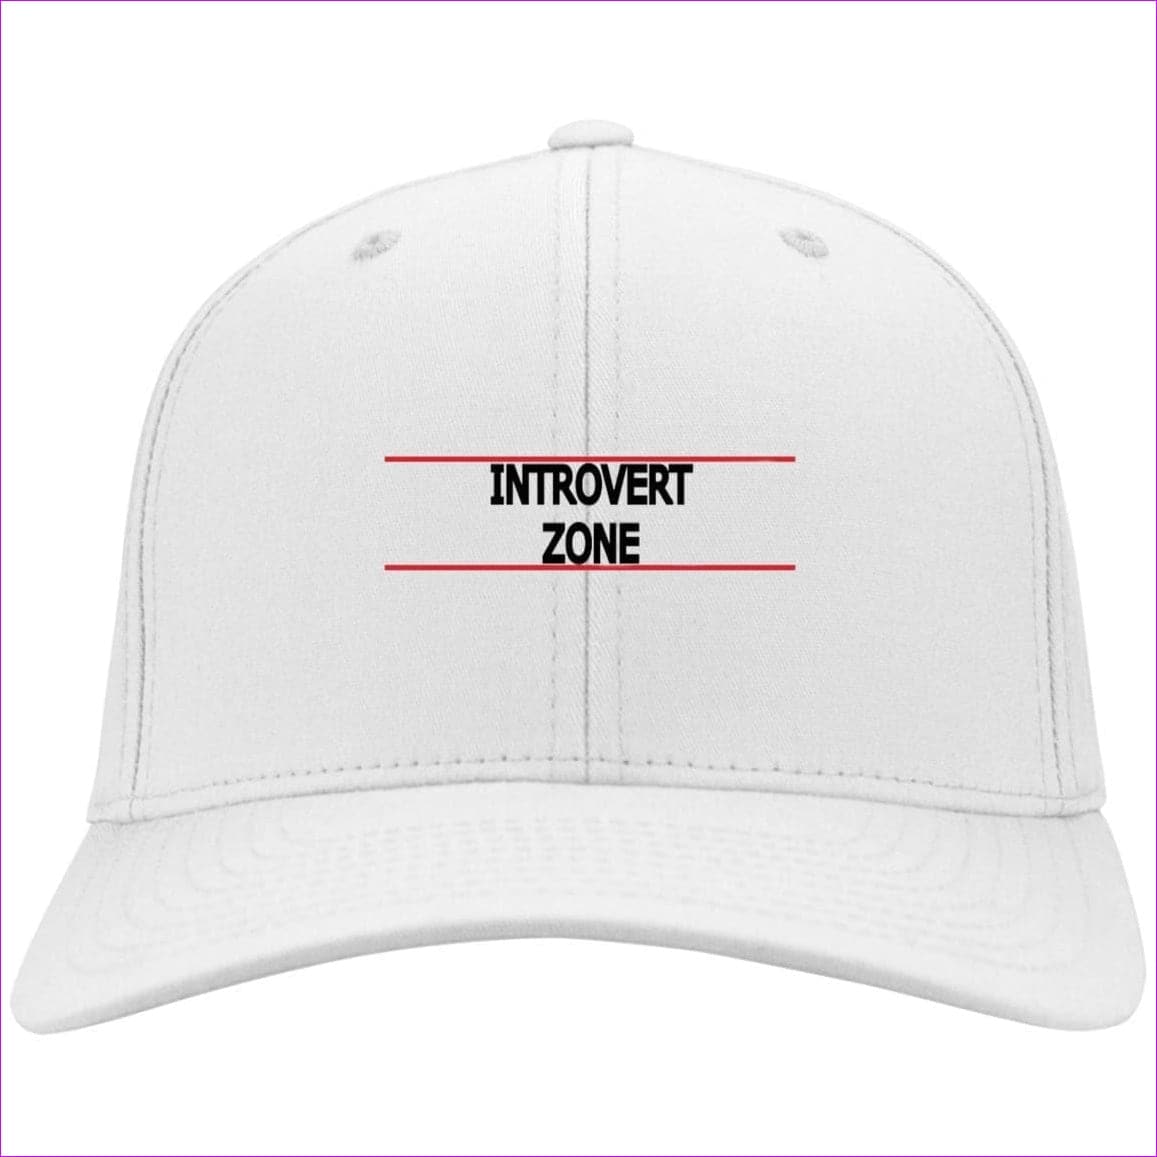 CP80 Twill Cap White One Size - Introvert Zone Embroidered Knit Cap, Cap, Beanie - Hat at TFC&H Co.